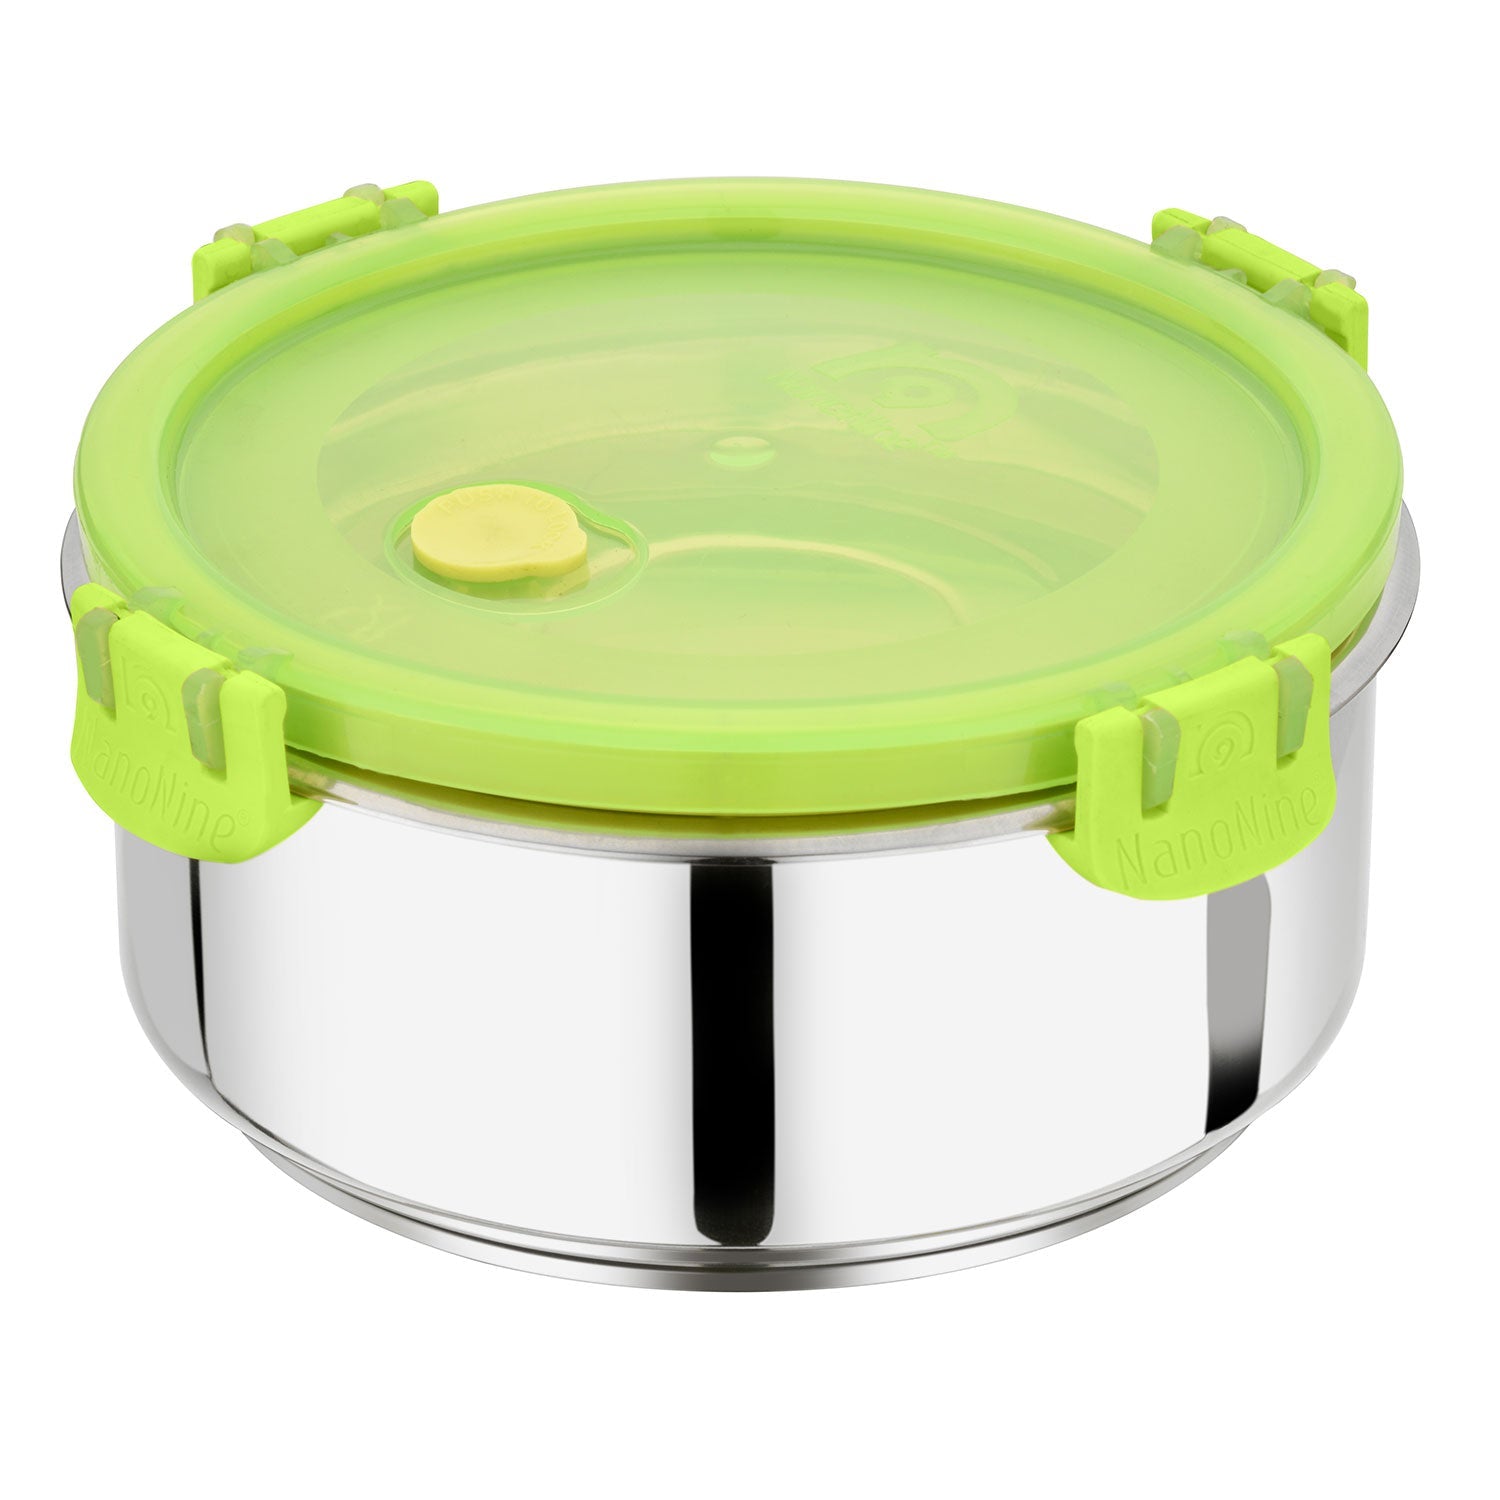 NanoNine Insulock Double Wall Insulated Stainless Steel Lunch Box Green